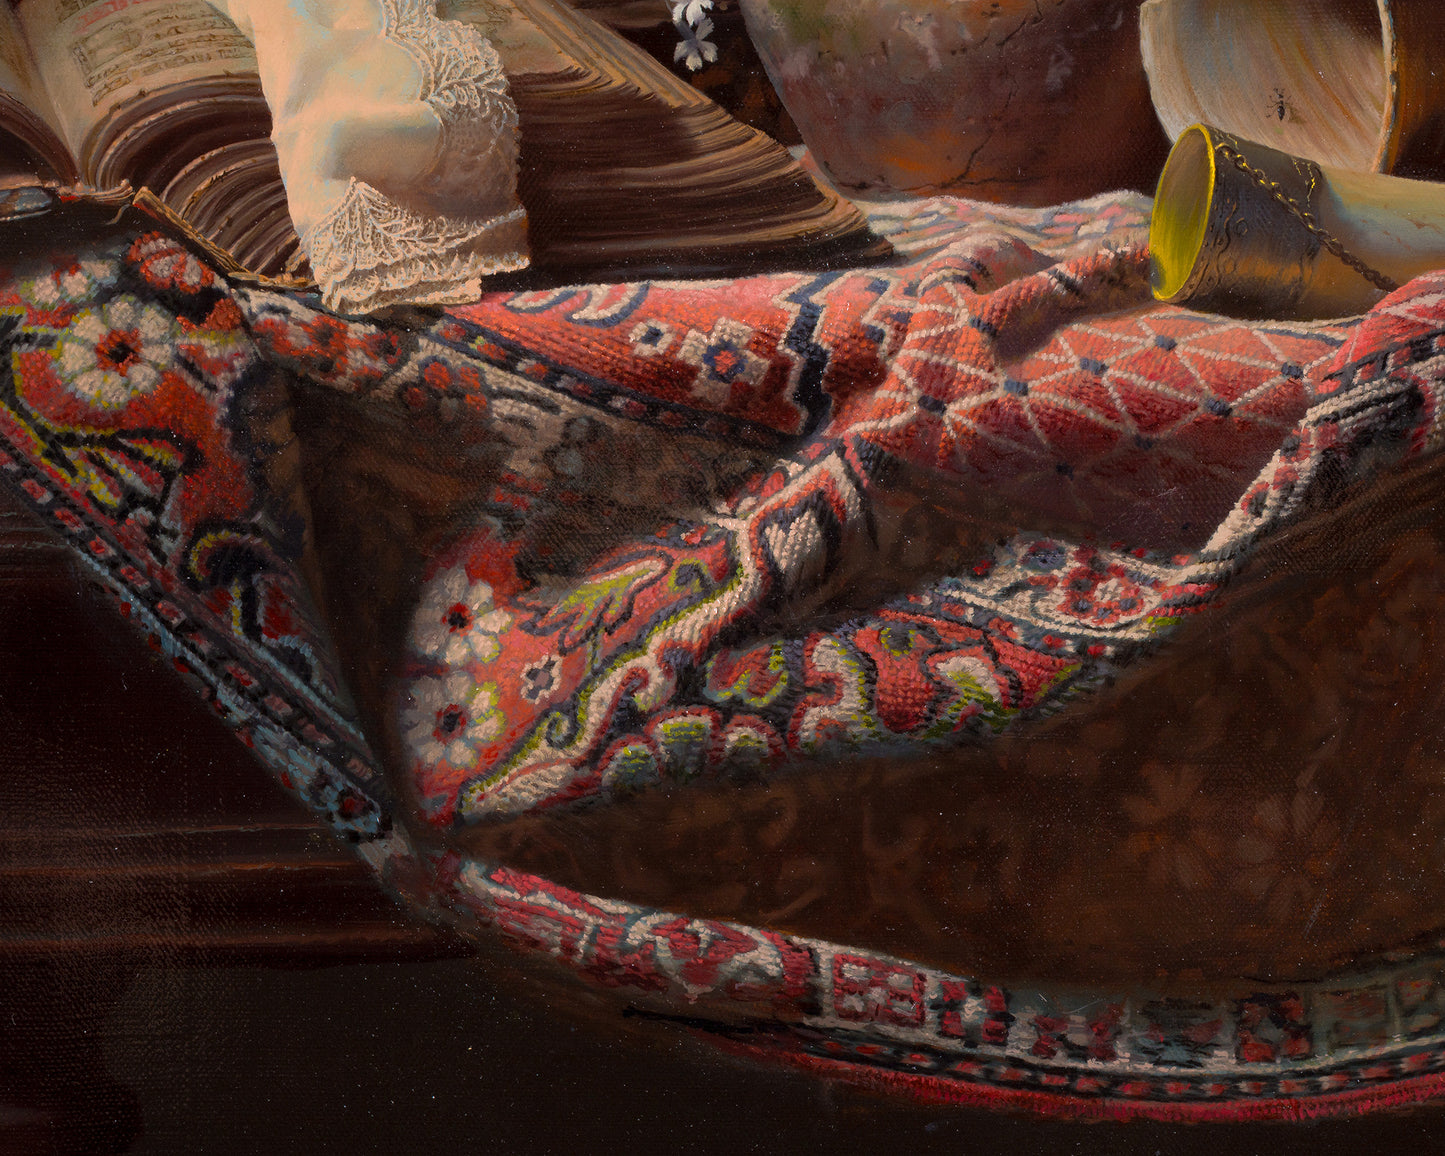 Fragment # 5 from "Gifts of Earth and Heaven" "Carpet" 20x16 Giclée Print on Archival Art Paper